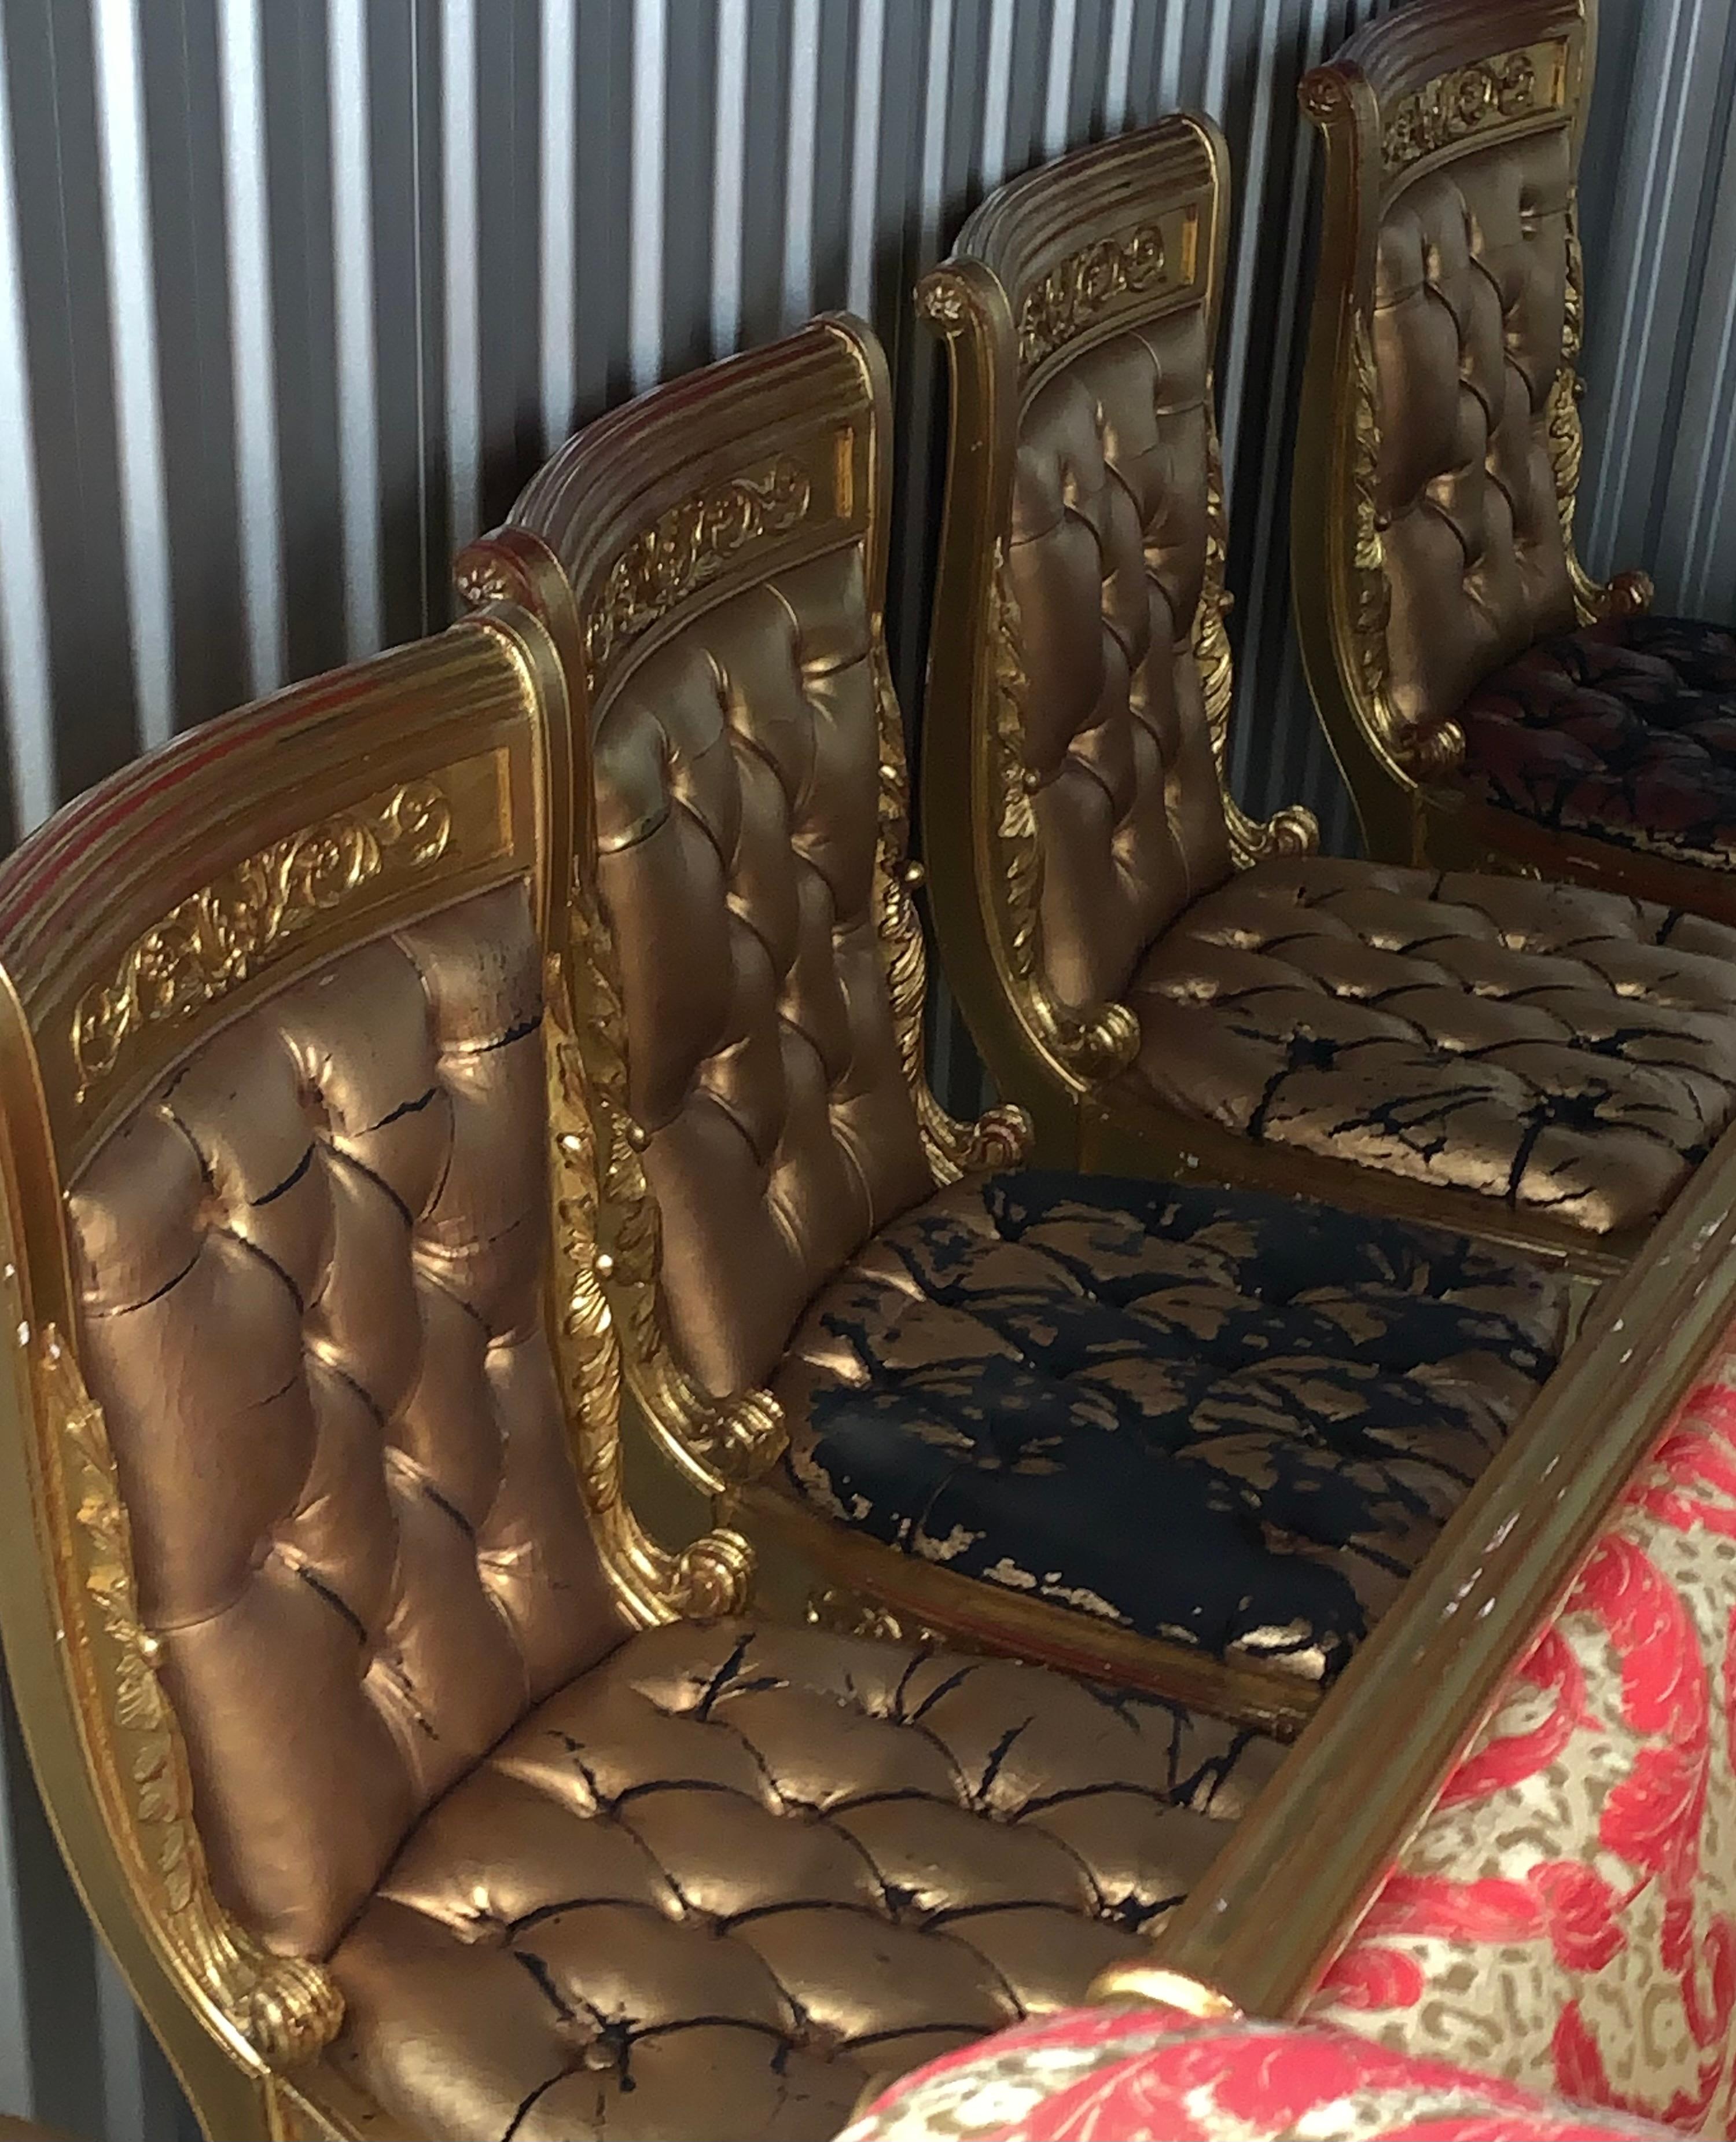 Versace Original Vanitas Gilt Dining Chair Set of 6, Gianni Versace, 1994 In Fair Condition For Sale In Brooklyn, NY